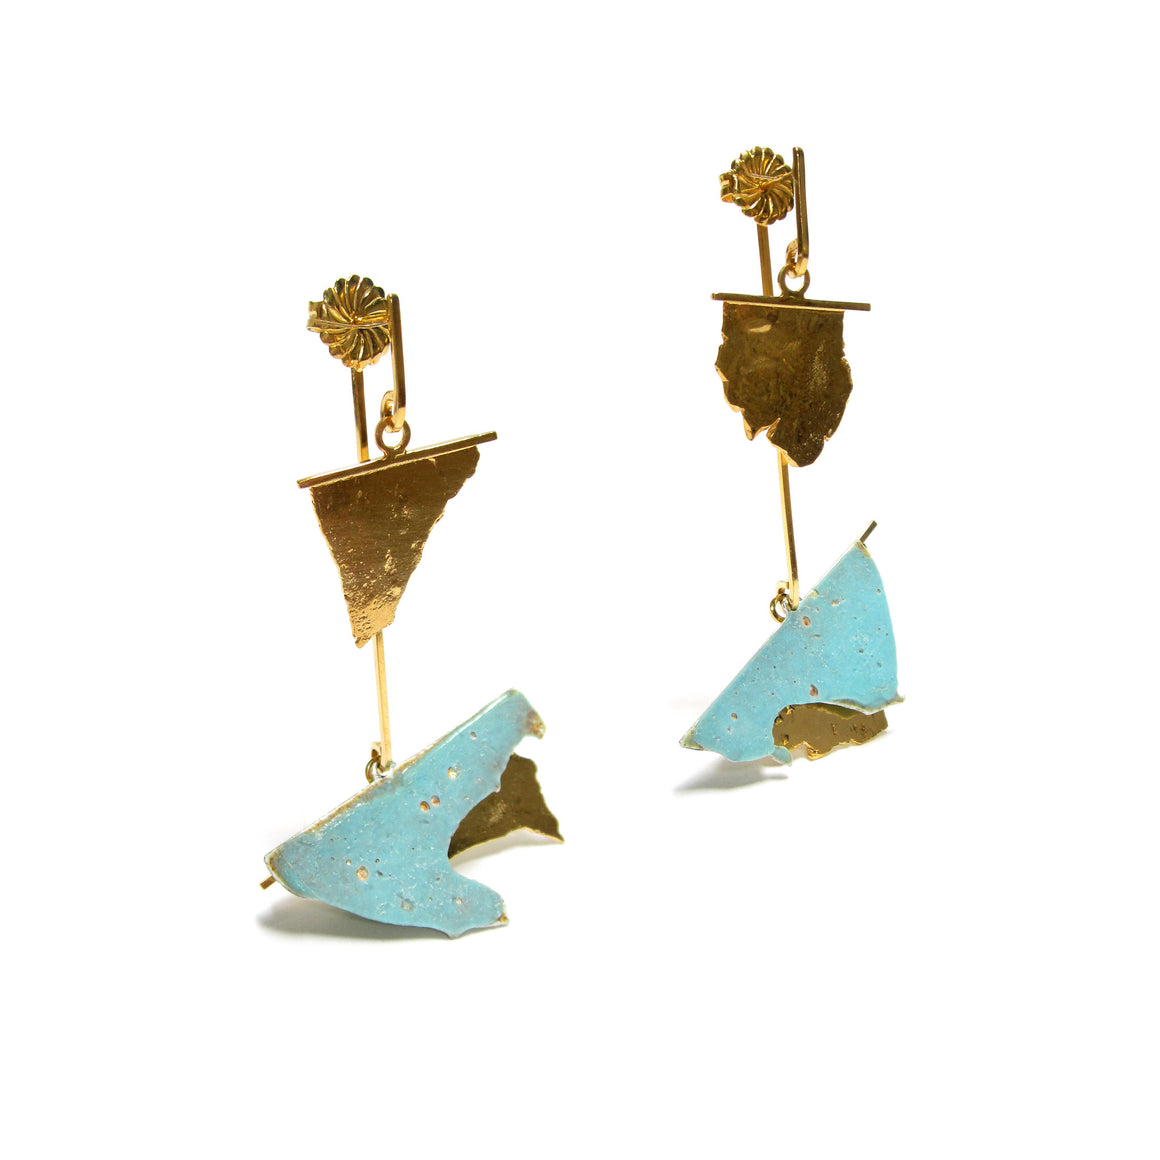 18K gold plated and enameled fine silver earrings by Seth Papac